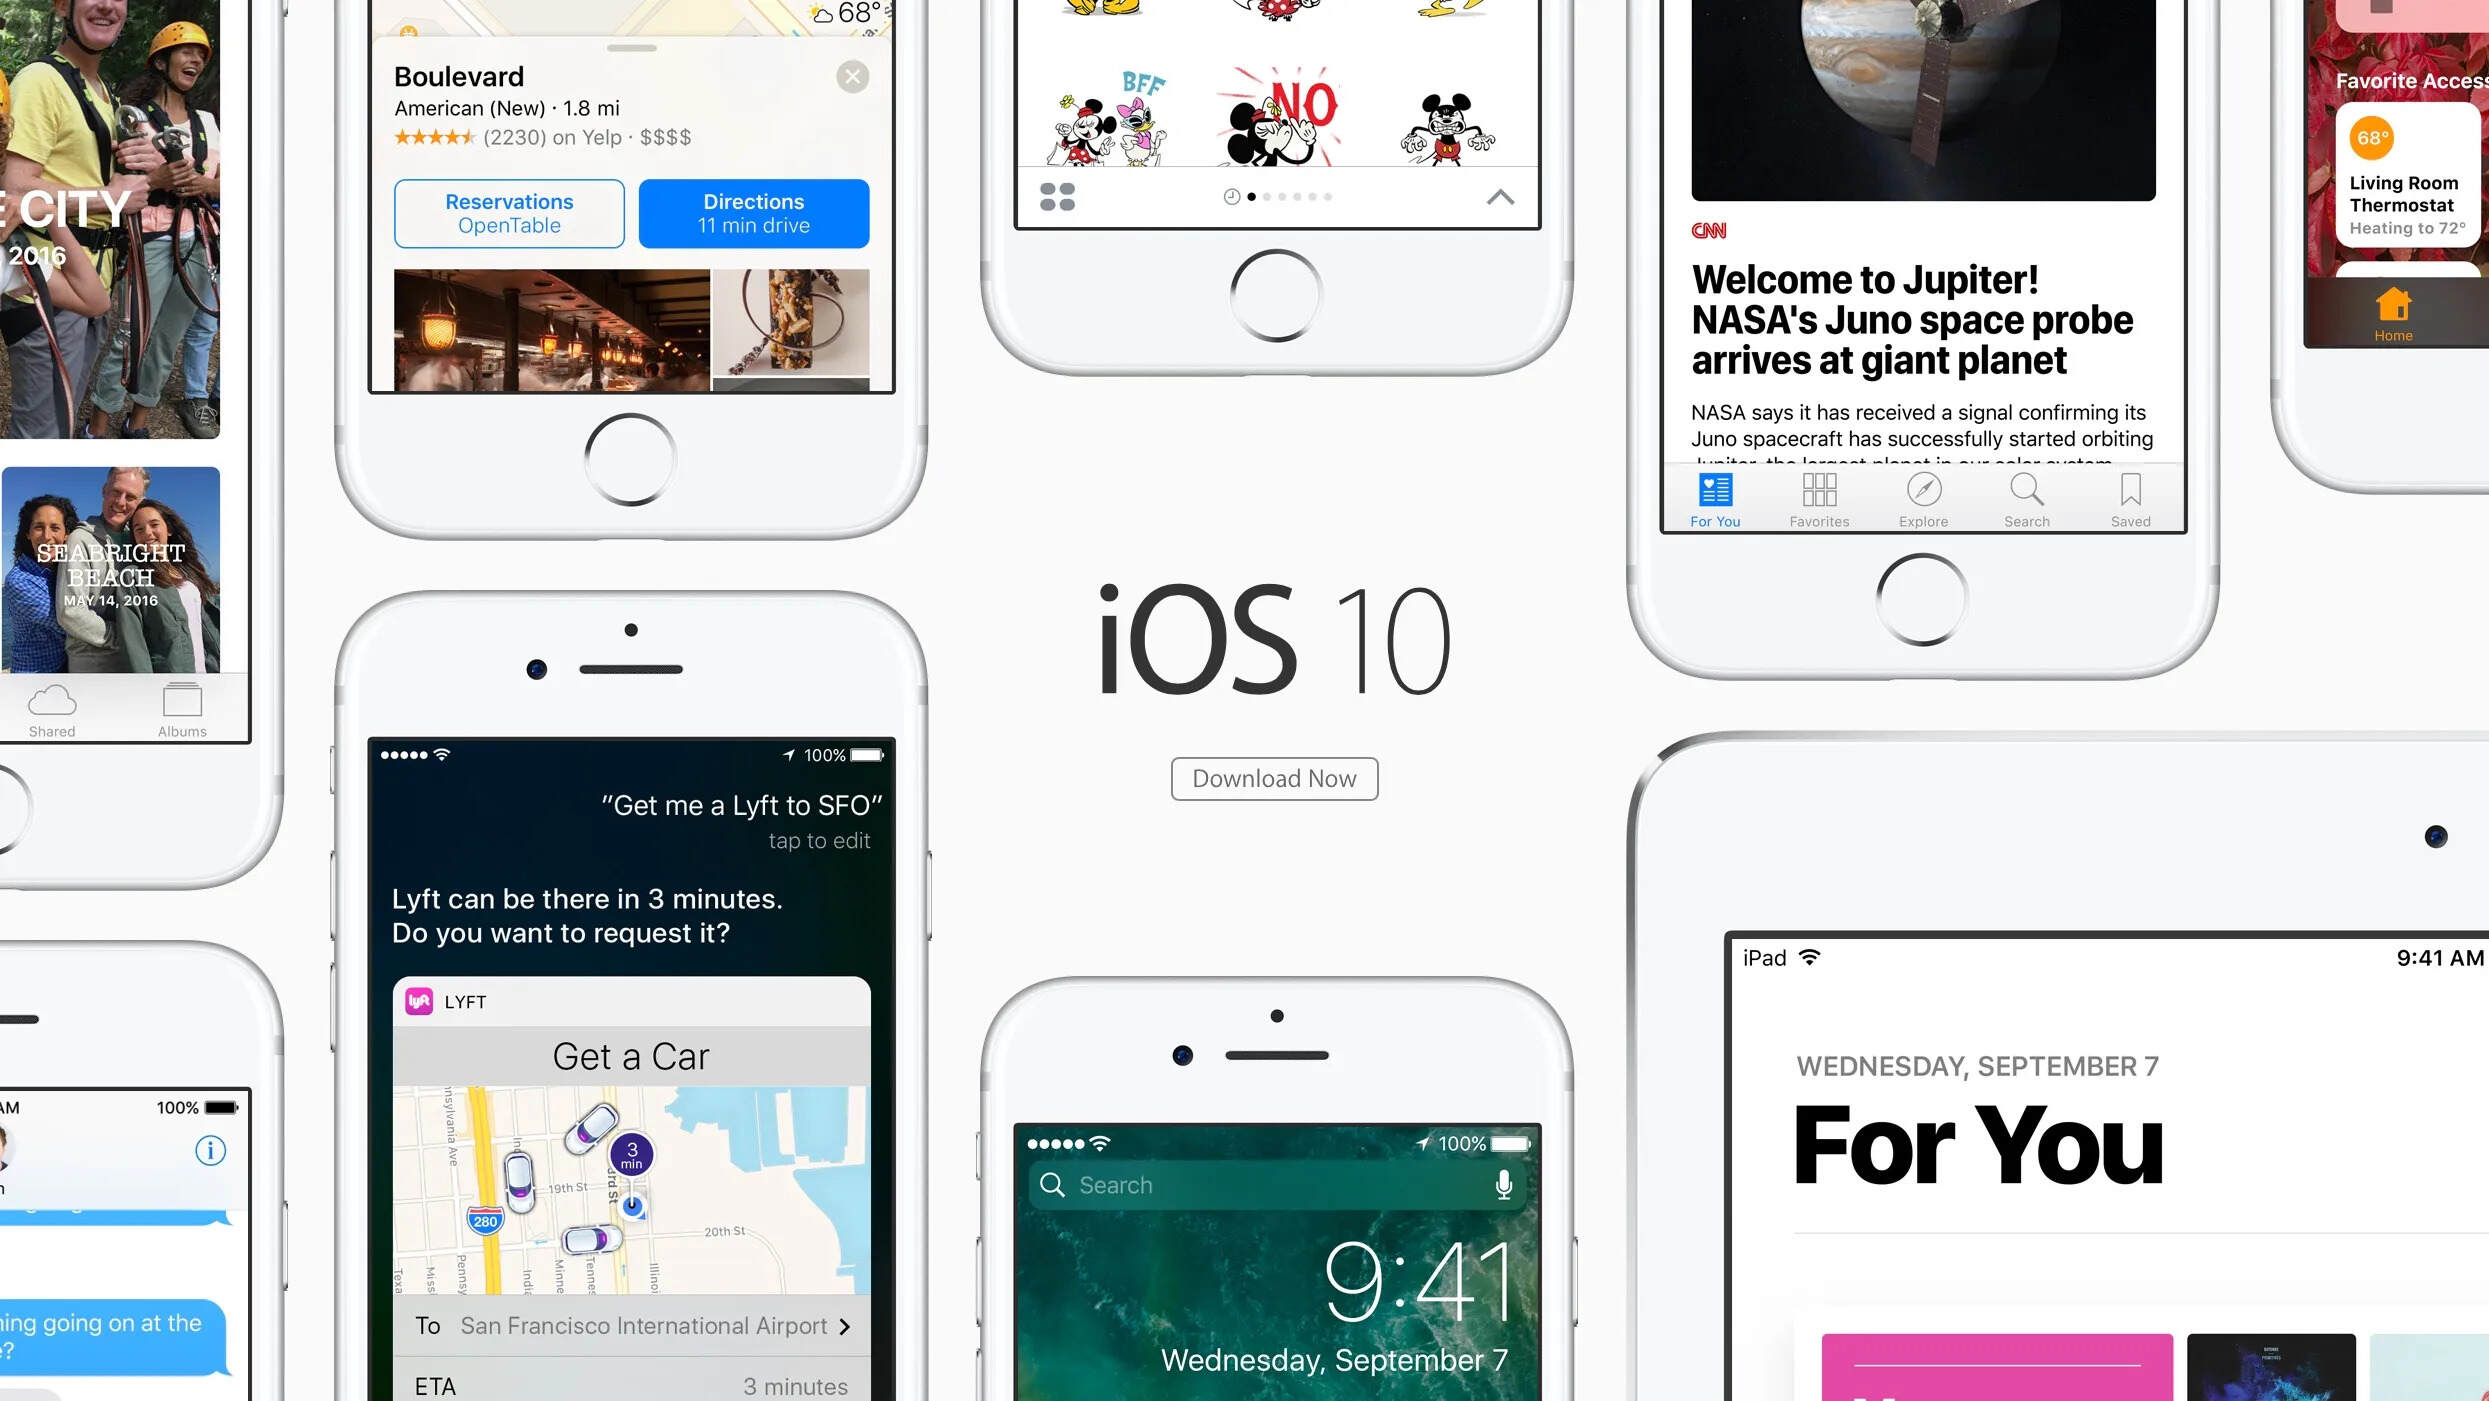 How To Download IOS 10 On IPhone 6